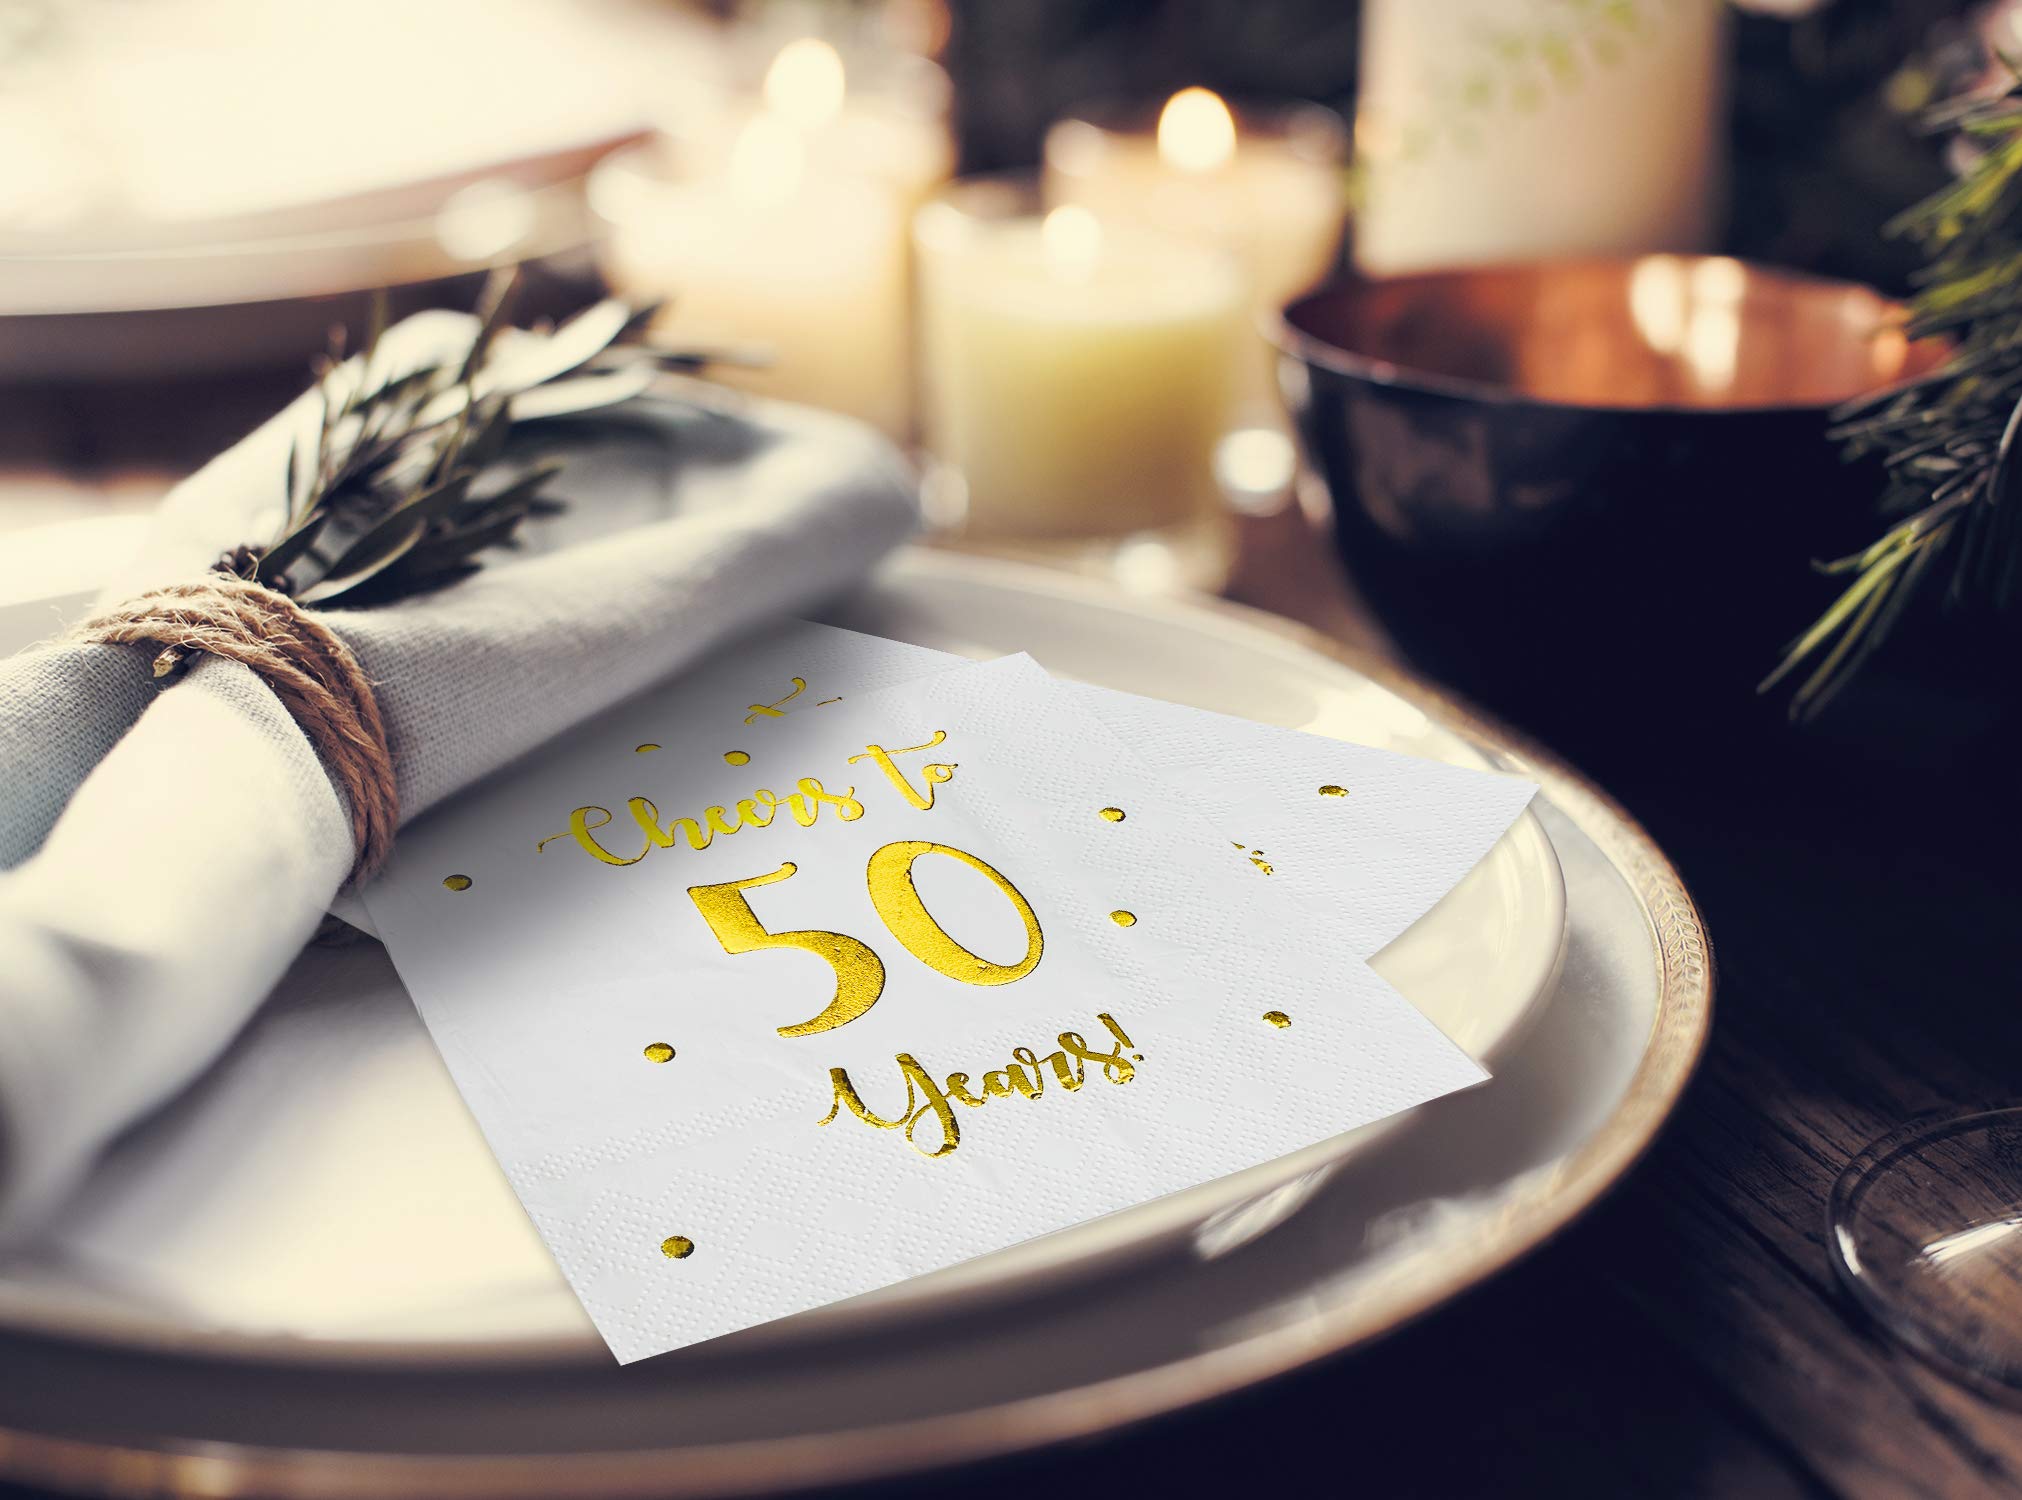 Cheers to 50 Years Cocktail Napkins | Happy 50th Birthday Decorations for Men and Women and Wedding Anniversary Party Decorations | 50-Pack 3-Ply Napkins | 5 x 5 inch folded (White)